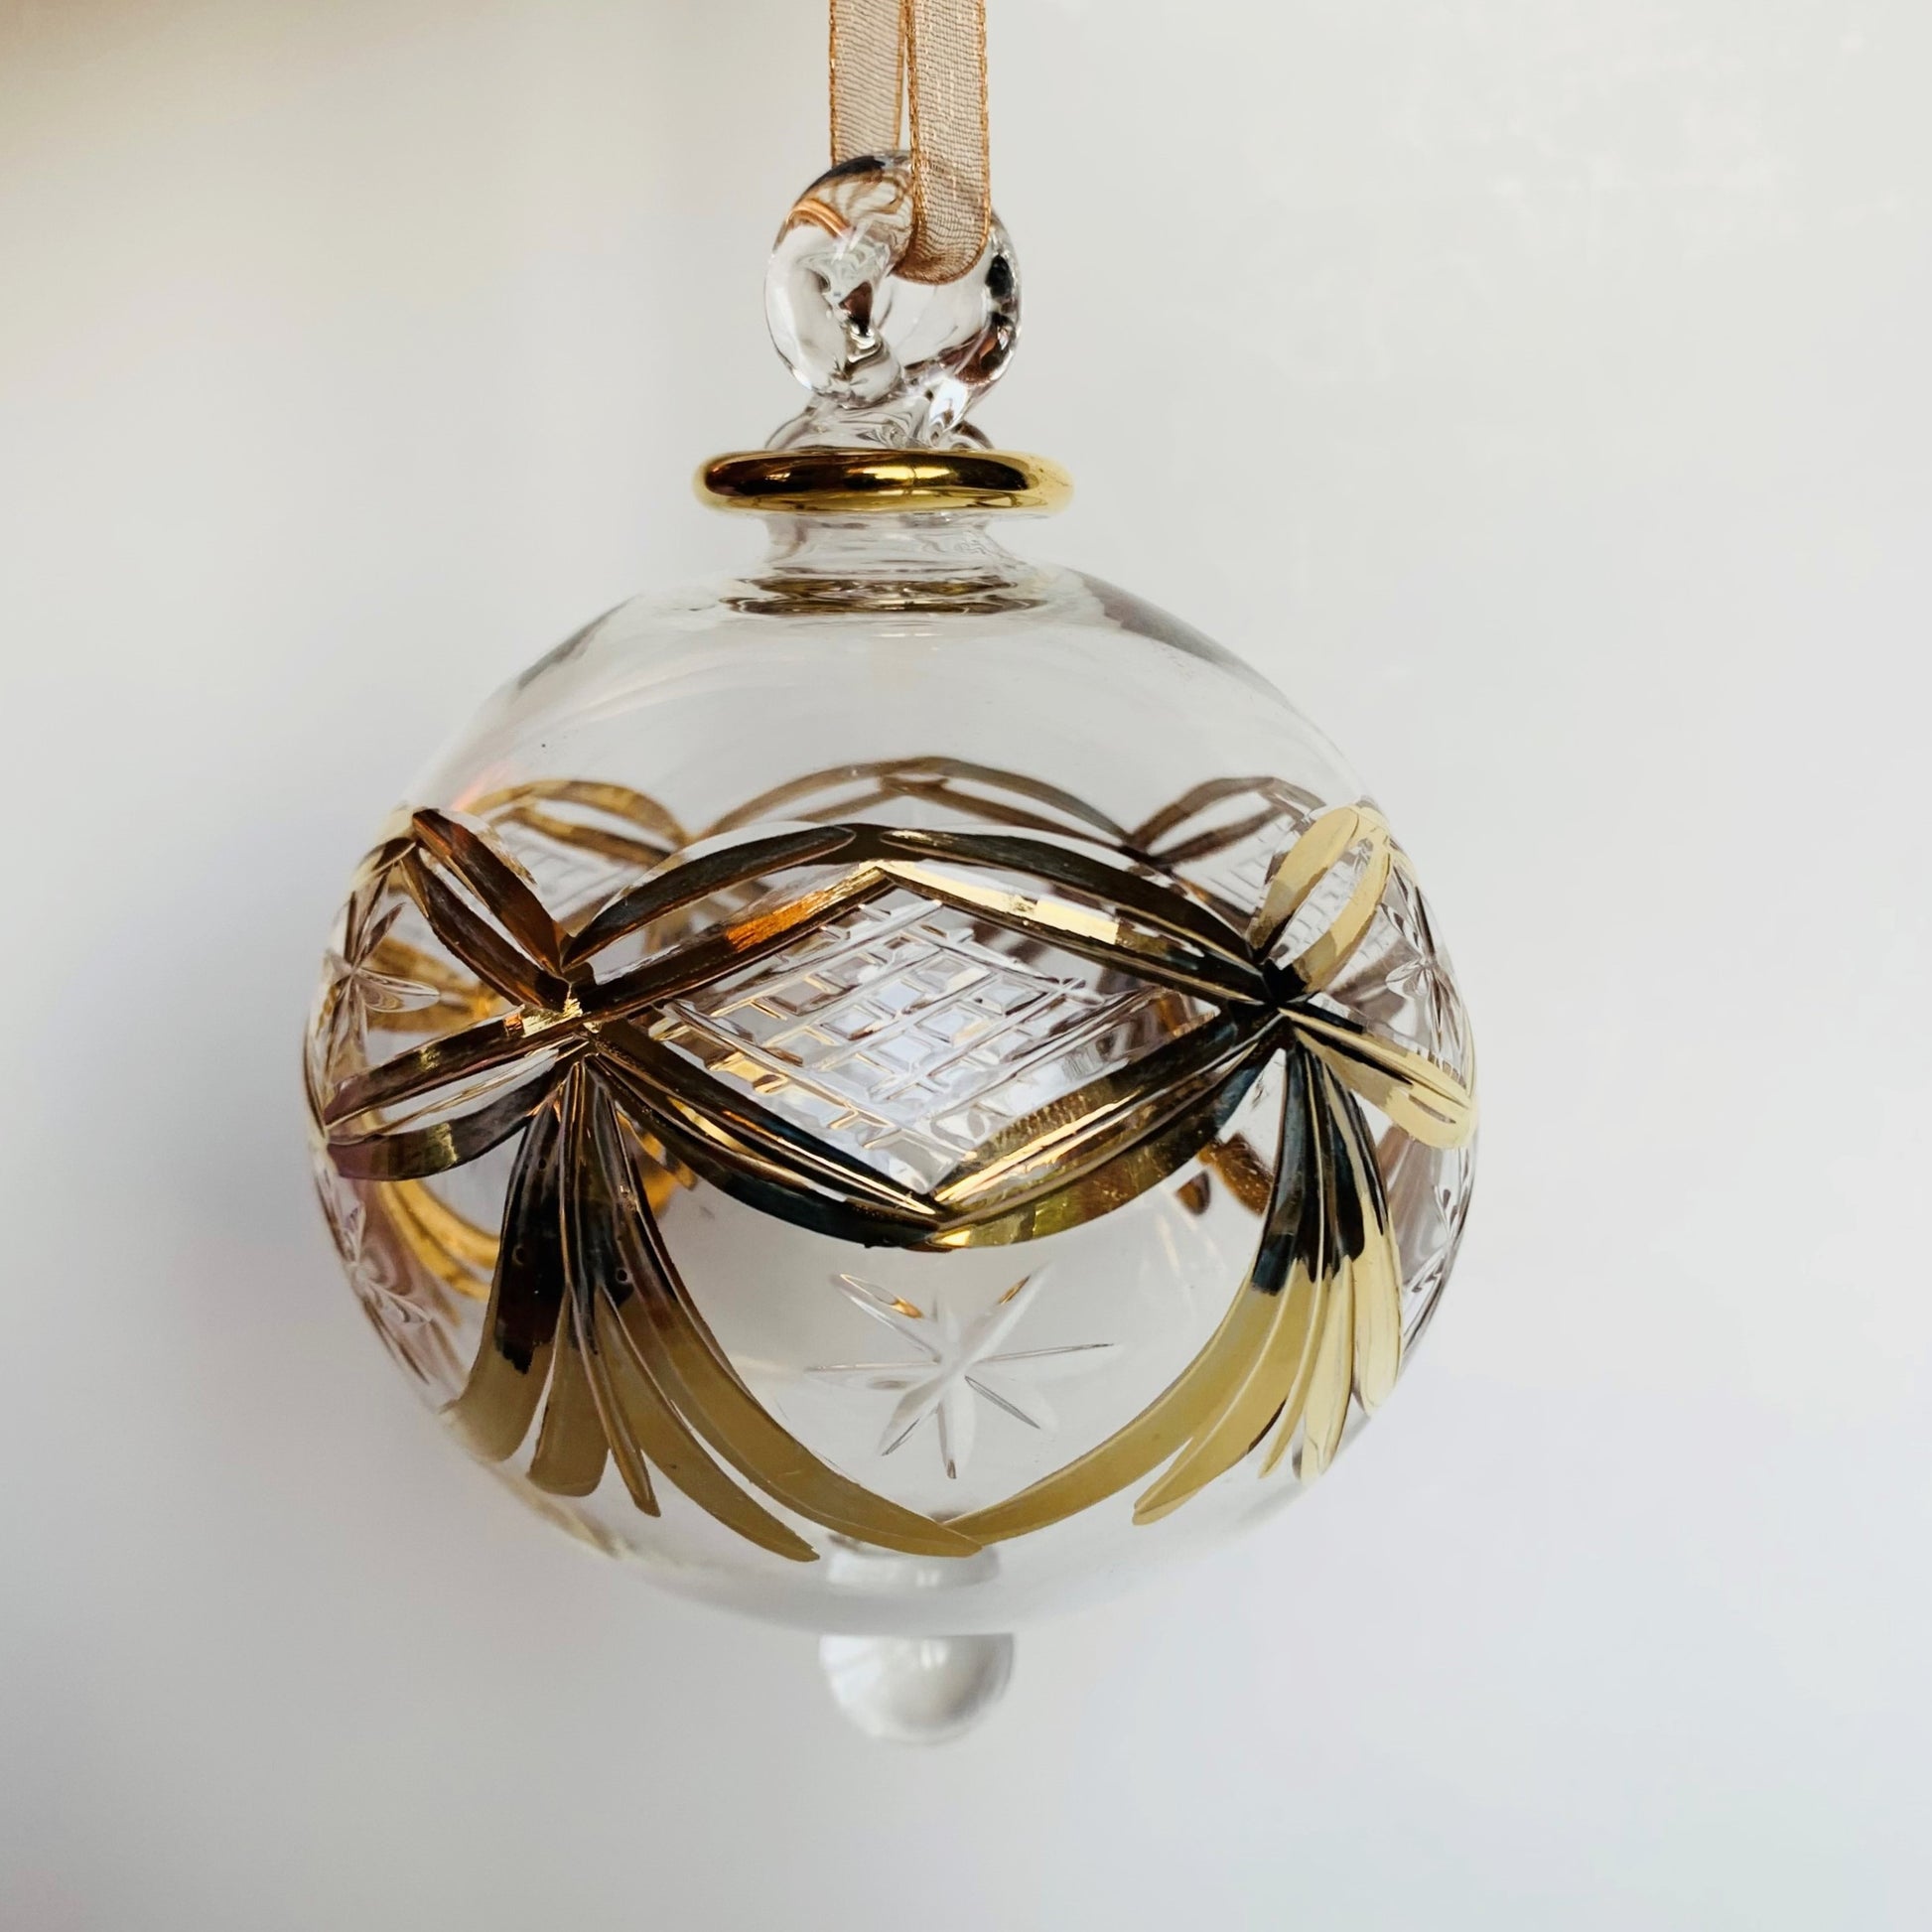 Ethically Sourced Blown Glass Ornament - Gold Garland